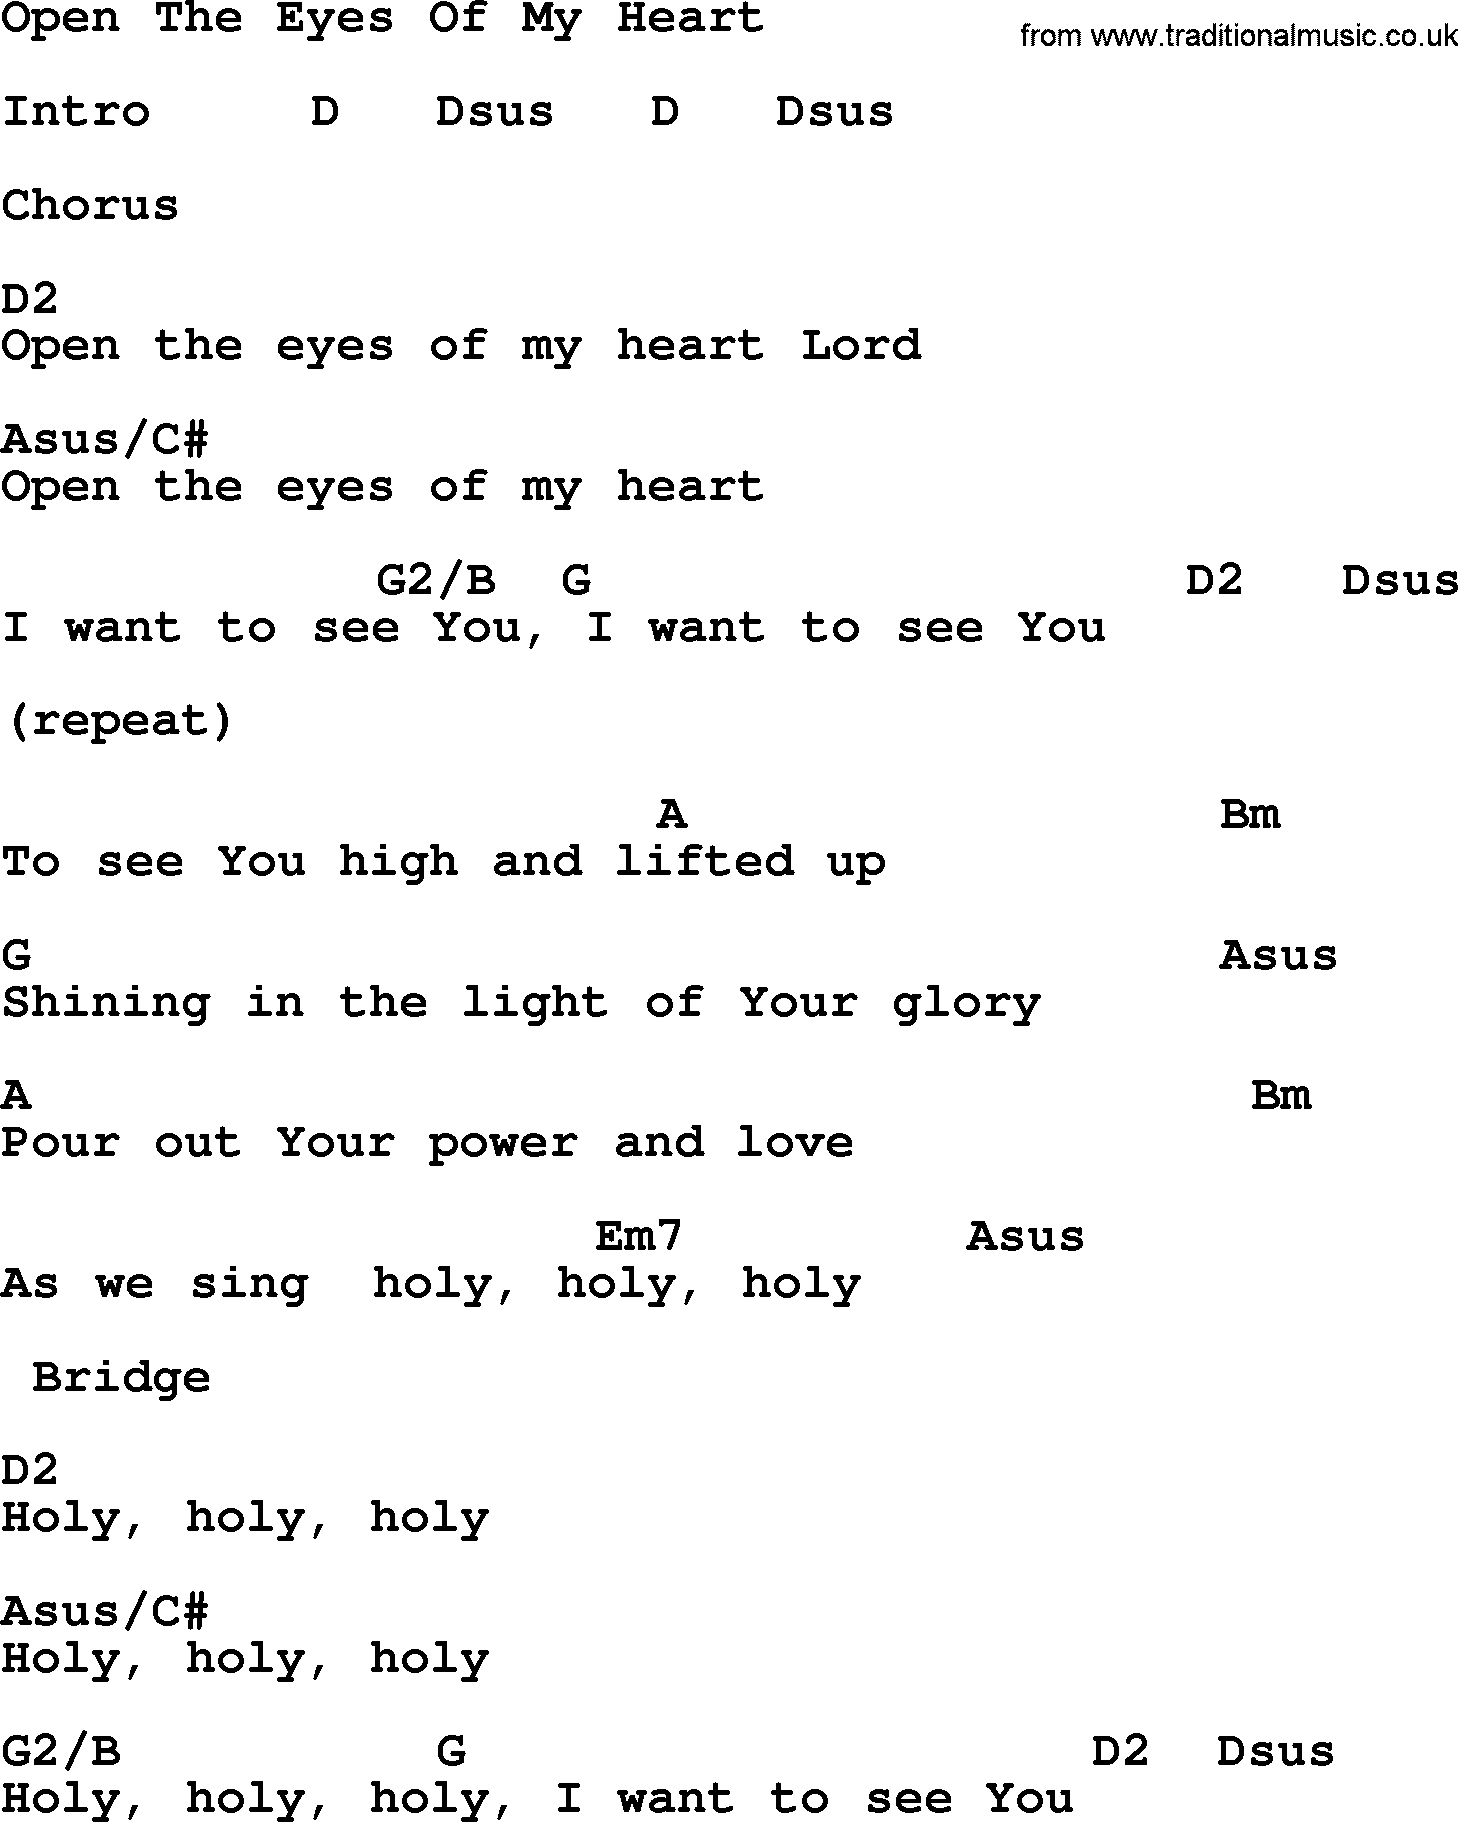 Open The Eyes Of My Heart Chords Ascension Hymn Open The Eyes Of My Heart Lyrics Chords And Pdf